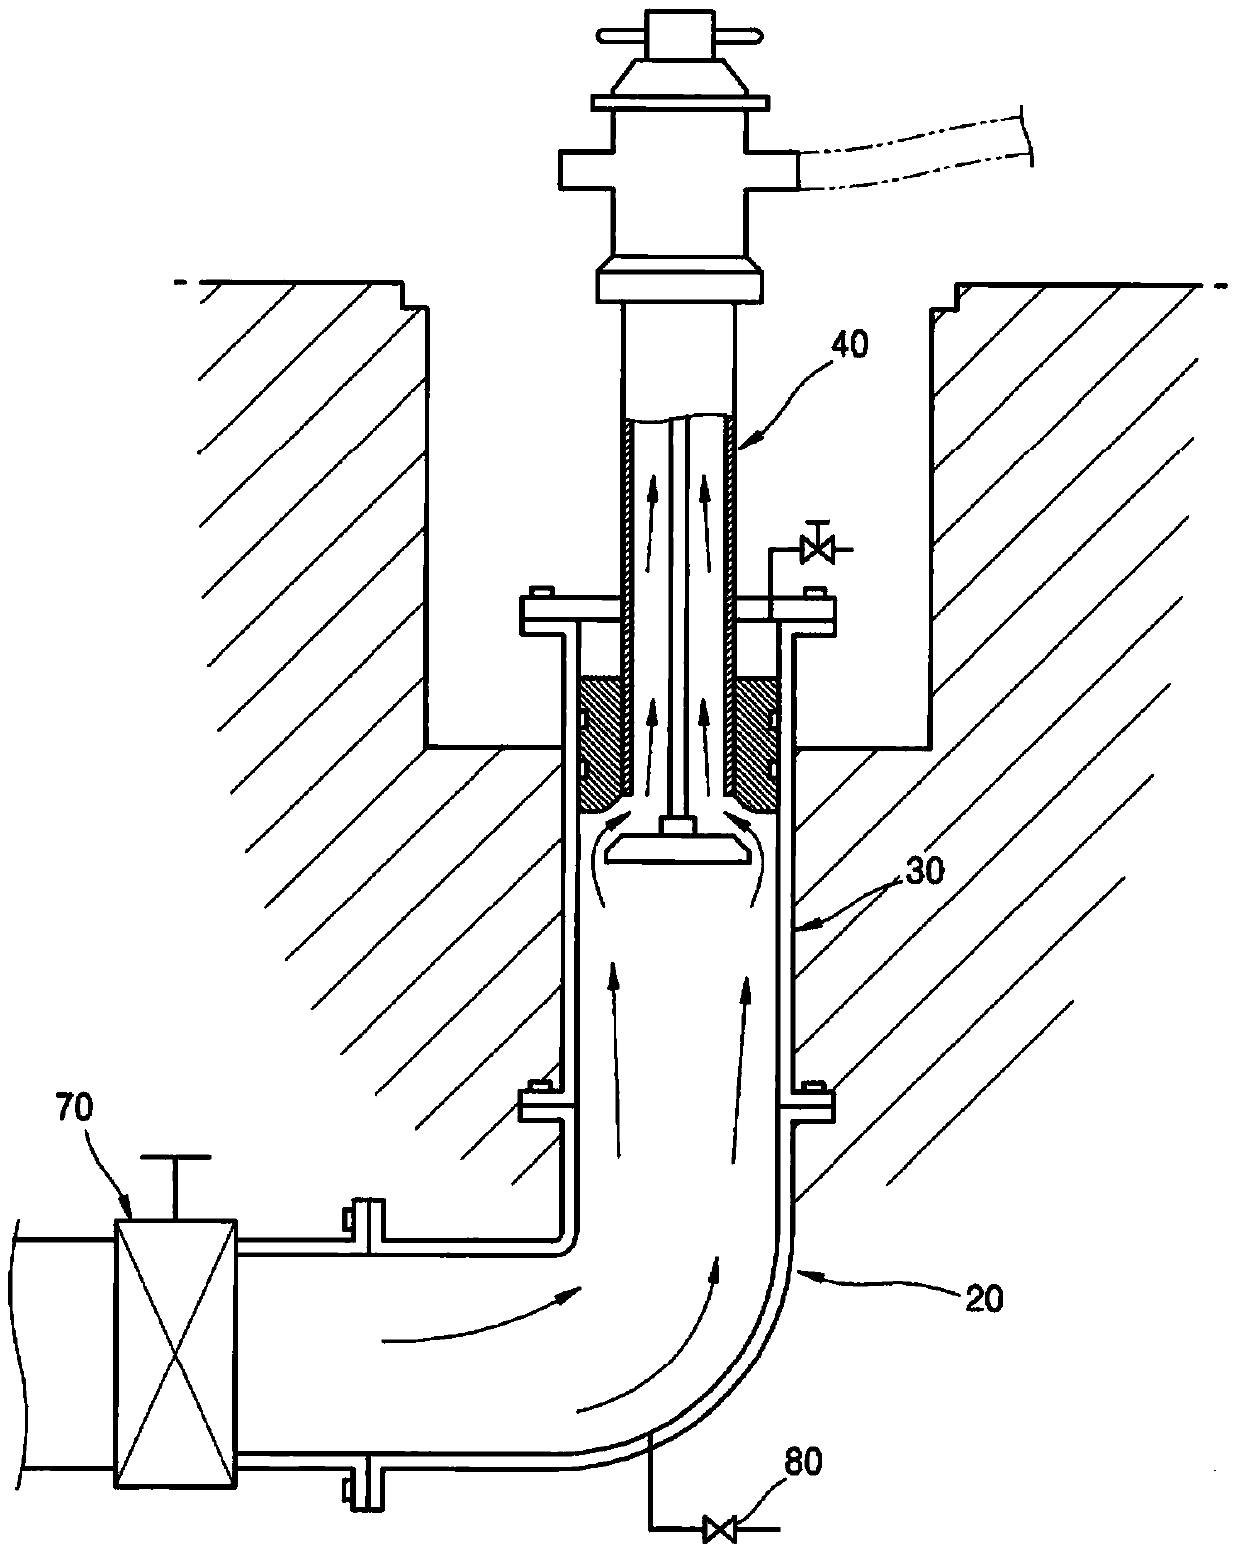 Fire hydrant assembly with check valve